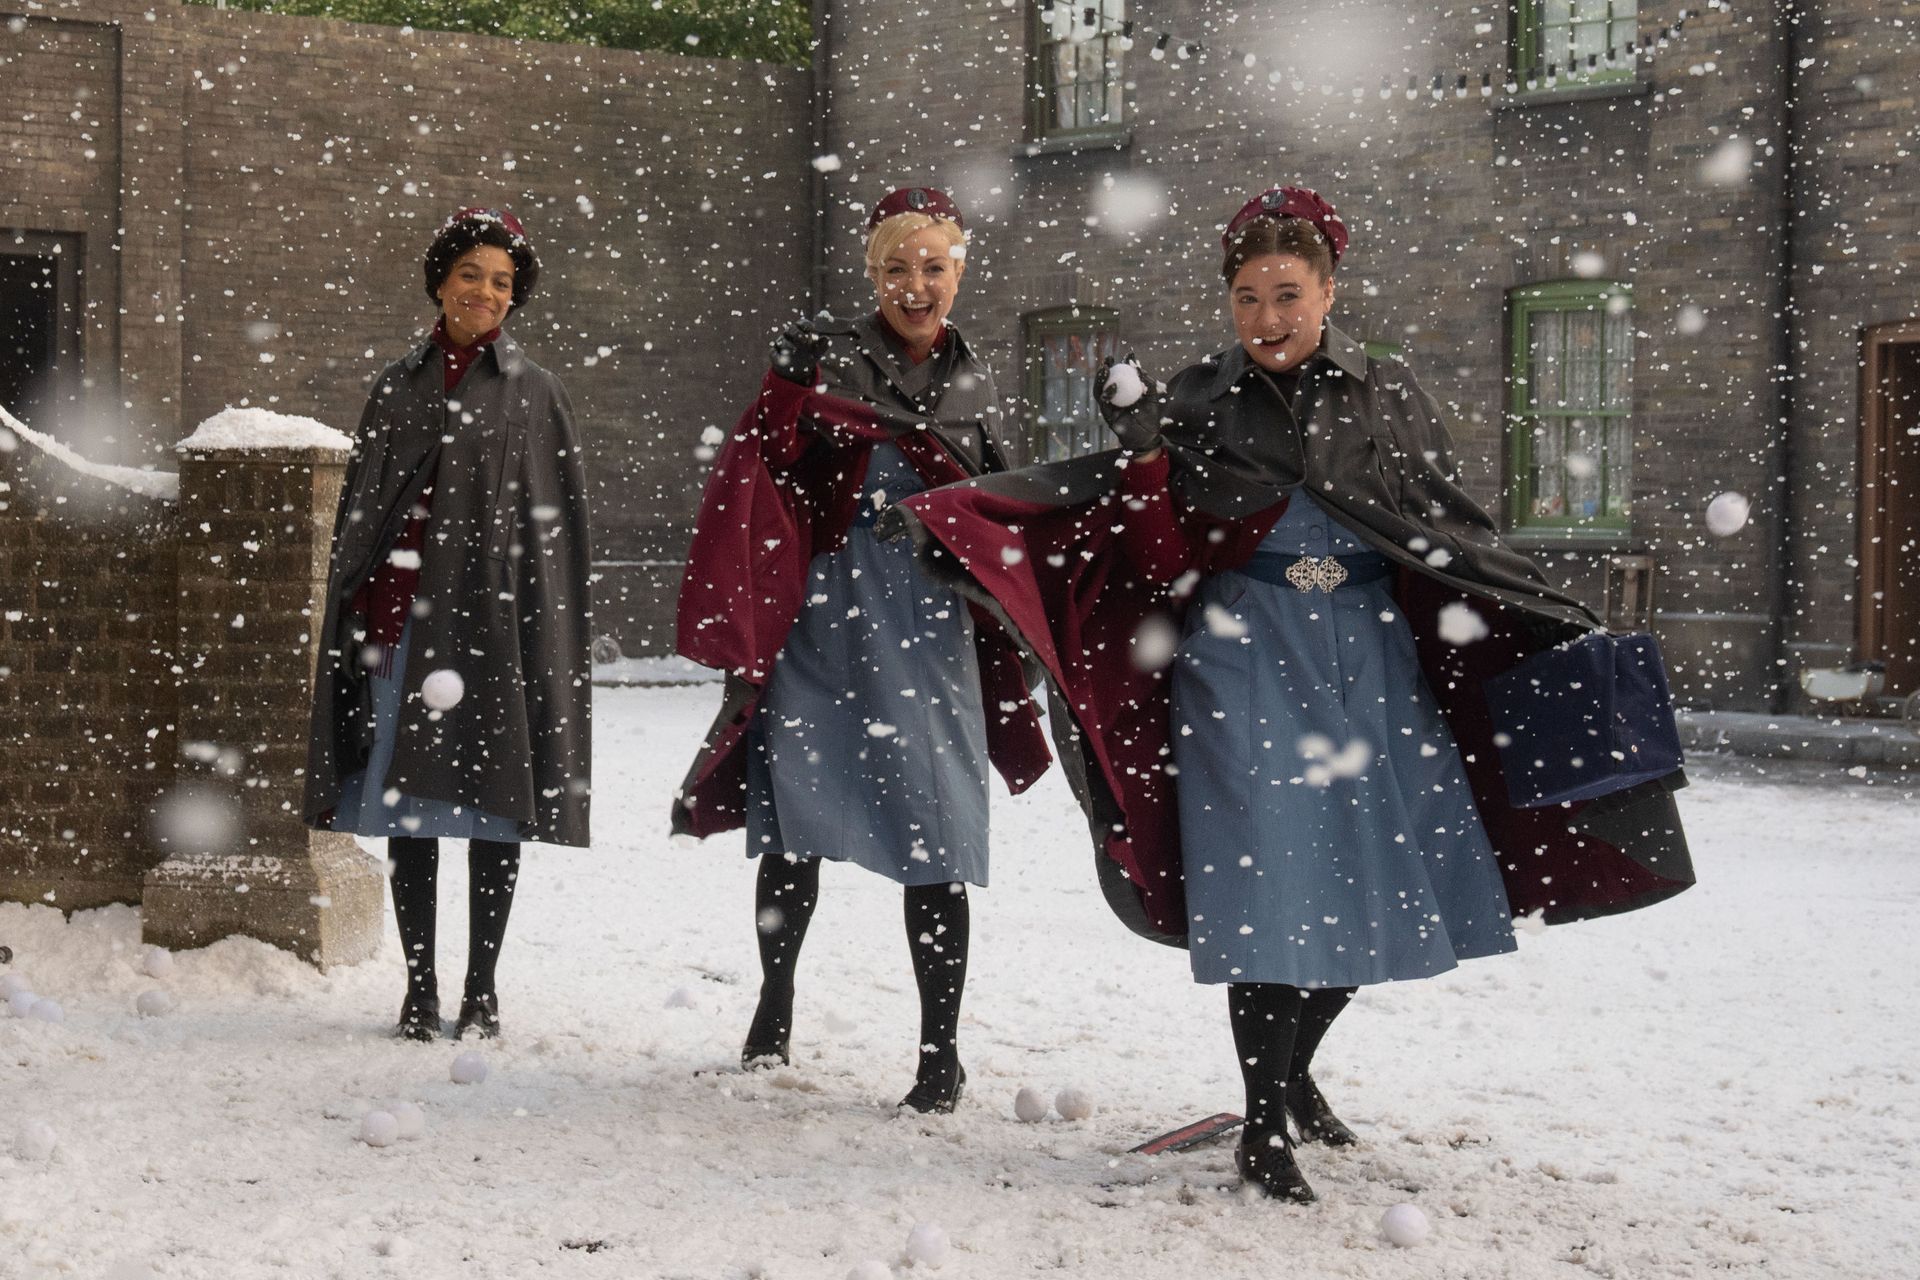 Call the Midwife 2022 Christmas special cast, plot, and more What to